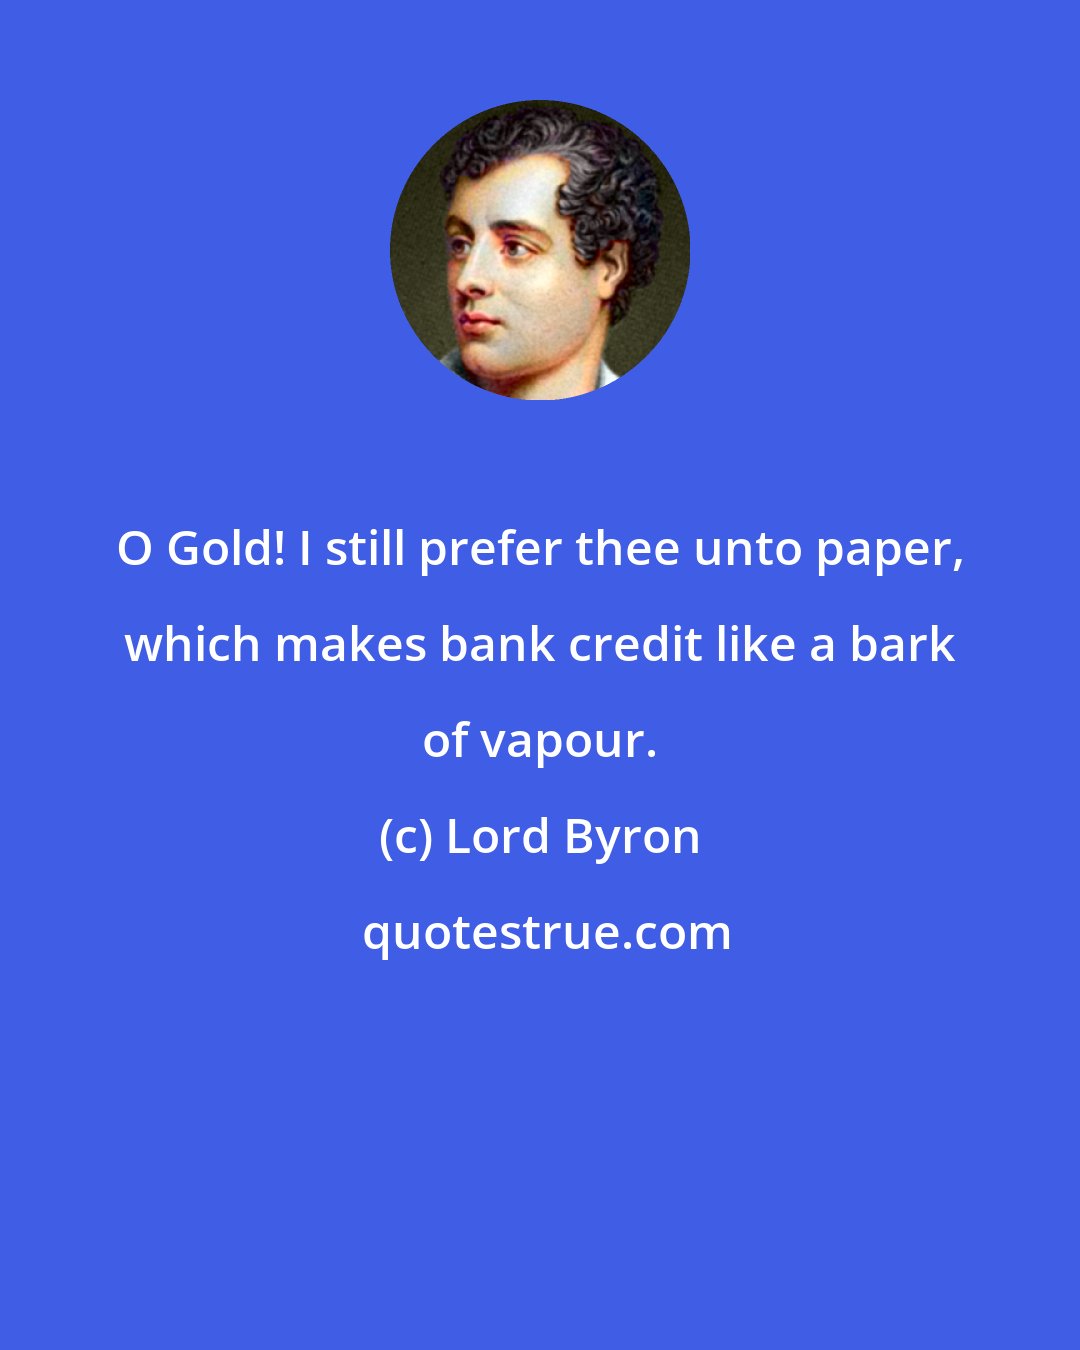 Lord Byron: O Gold! I still prefer thee unto paper, which makes bank credit like a bark of vapour.